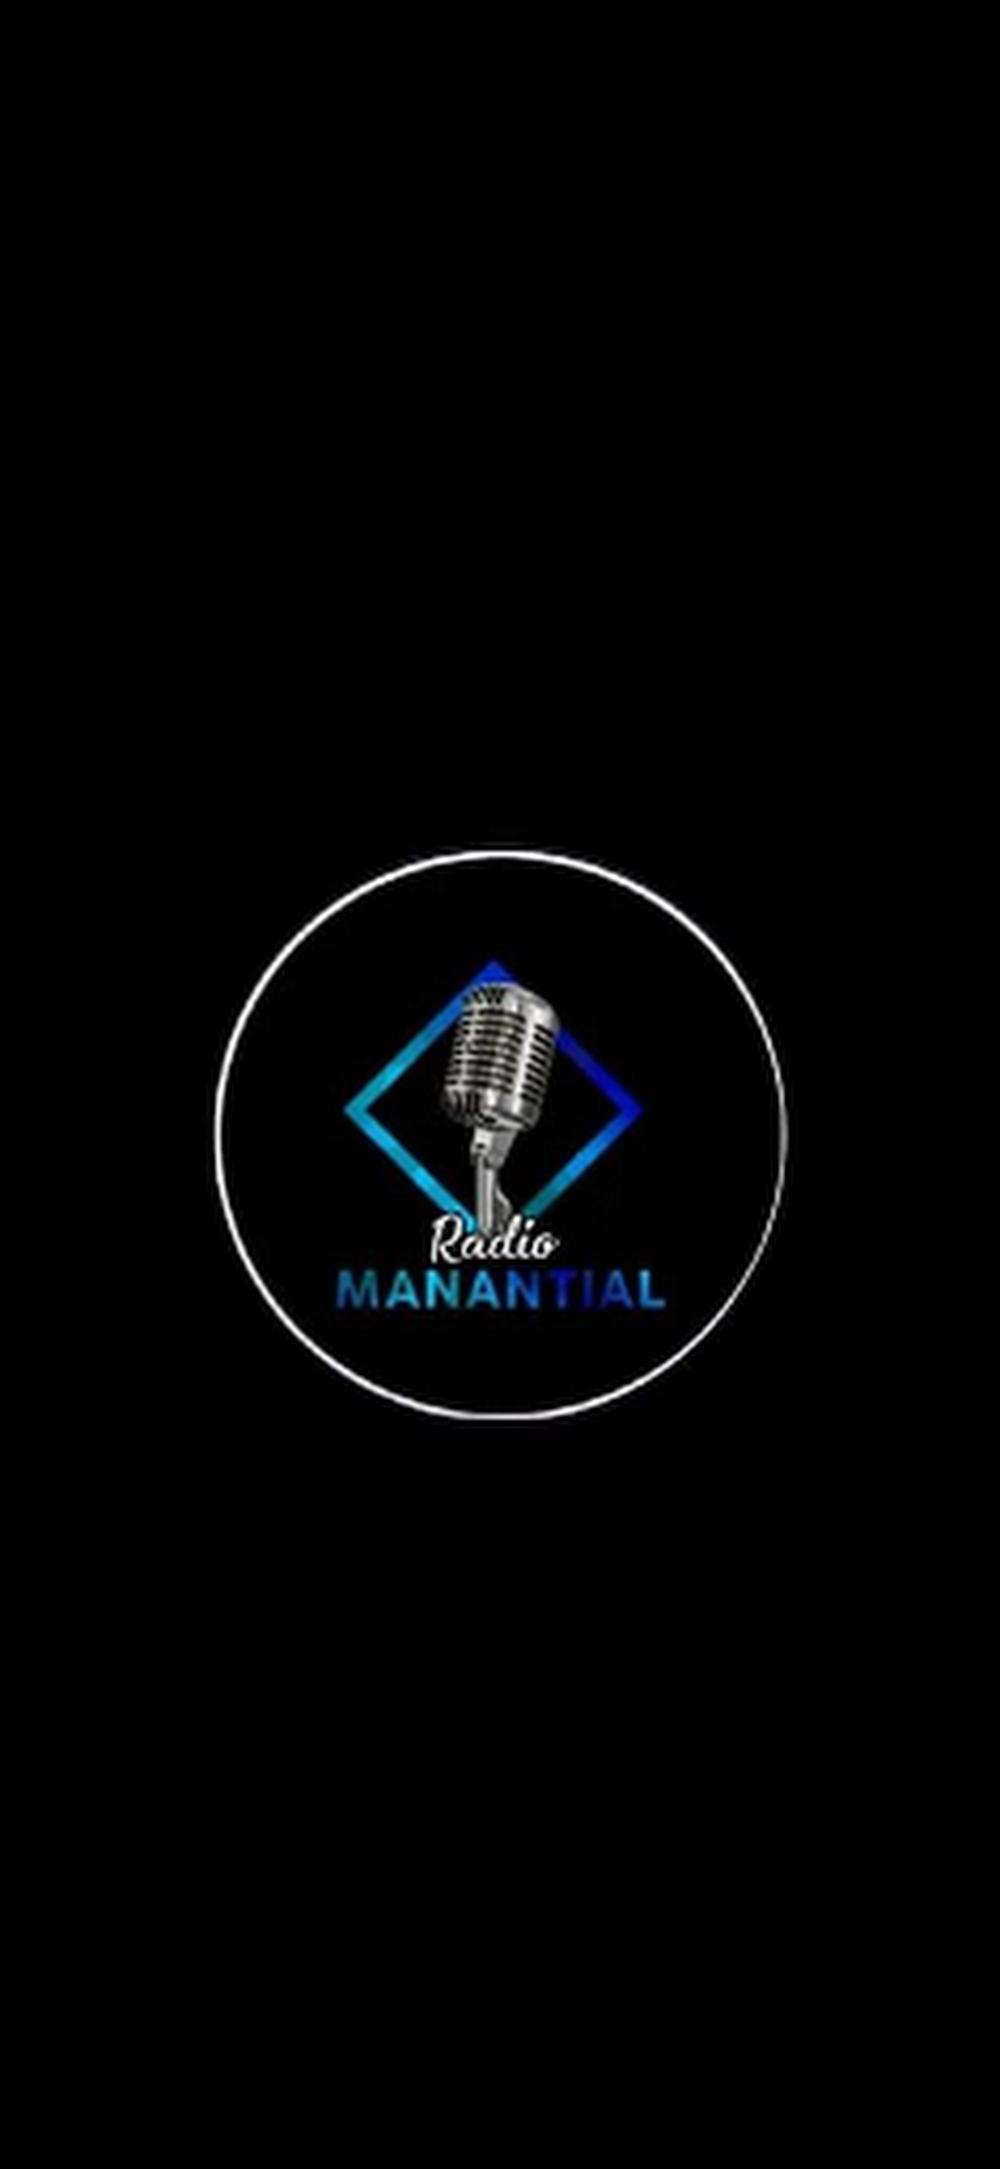 Listen to RADIO_MANANTIAL_CHILE 